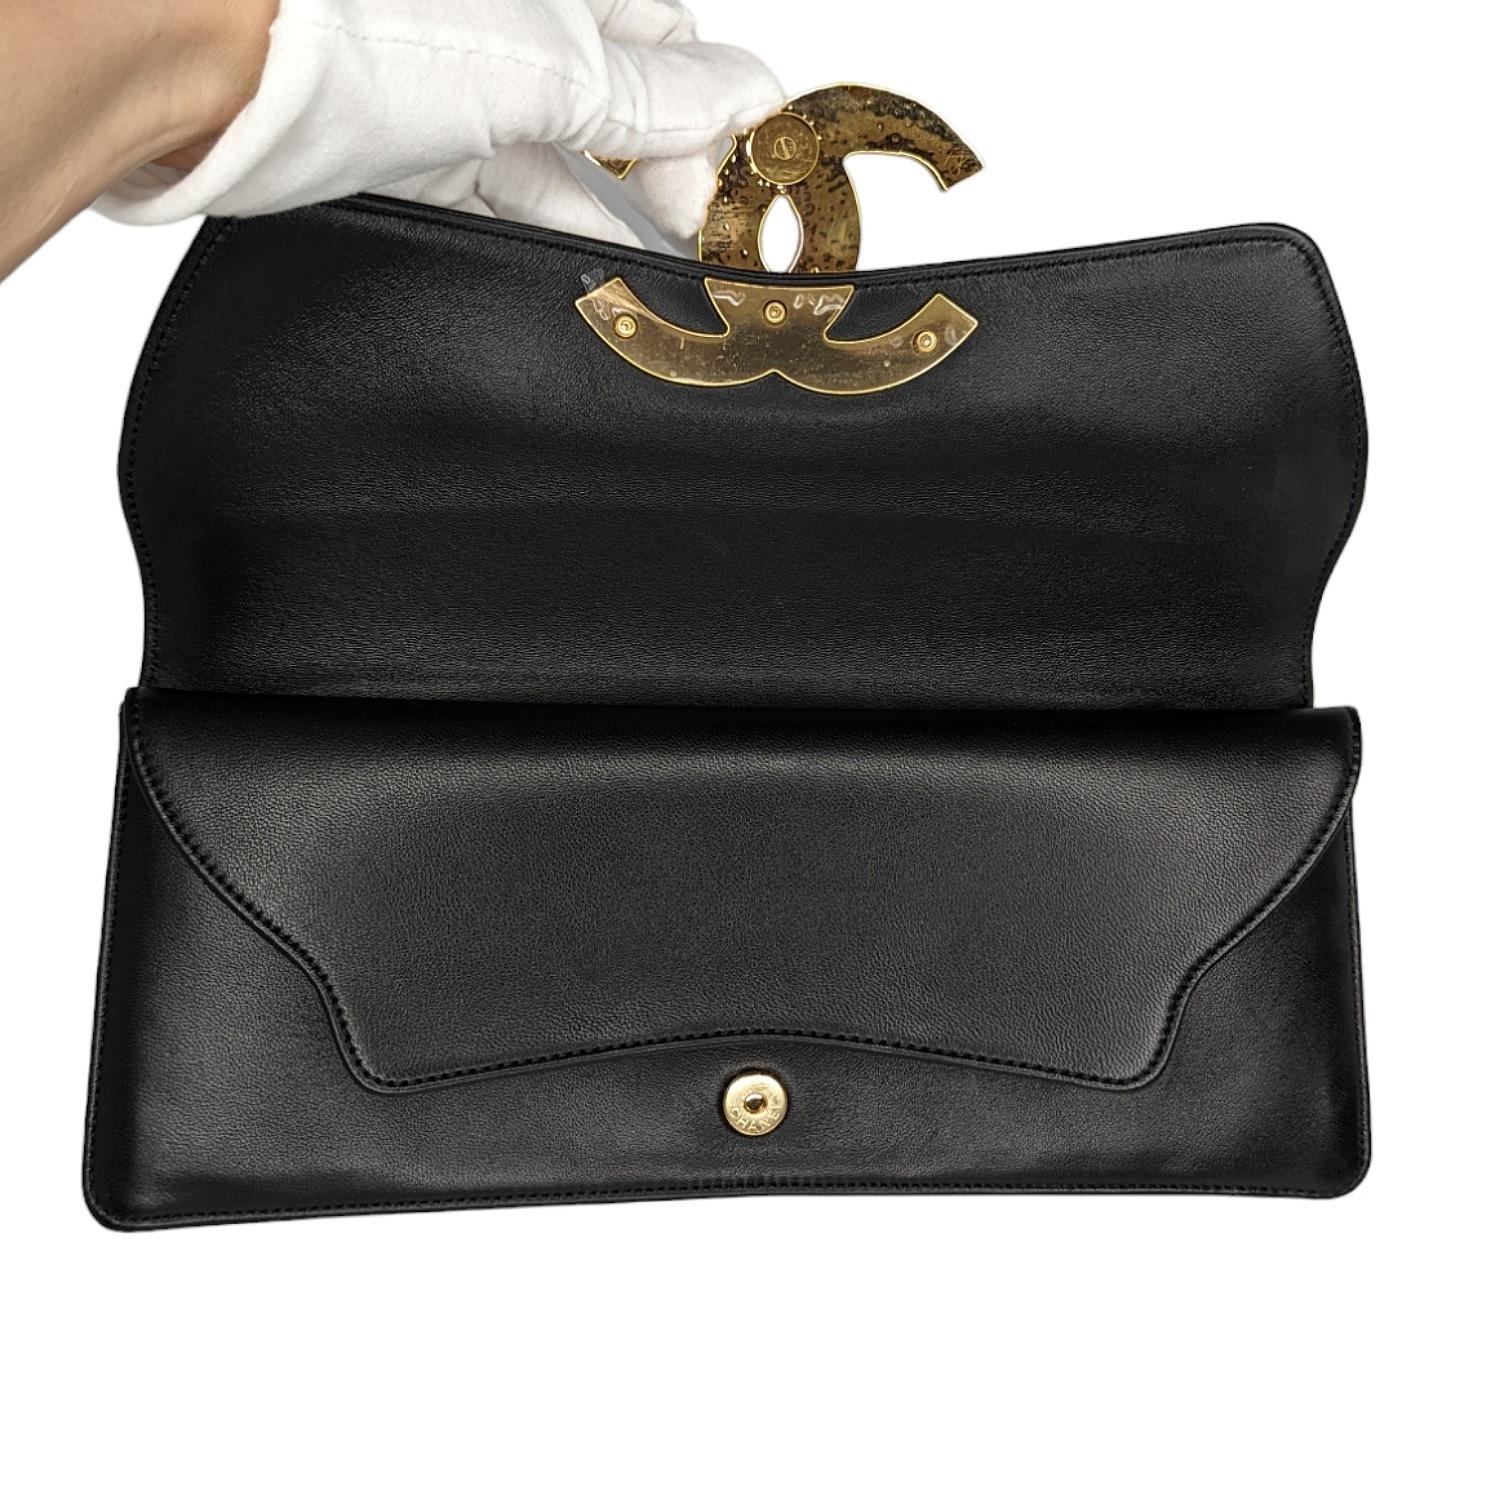 Chanel Black Lambskin Ancient Egypt Inspired Clutch 2